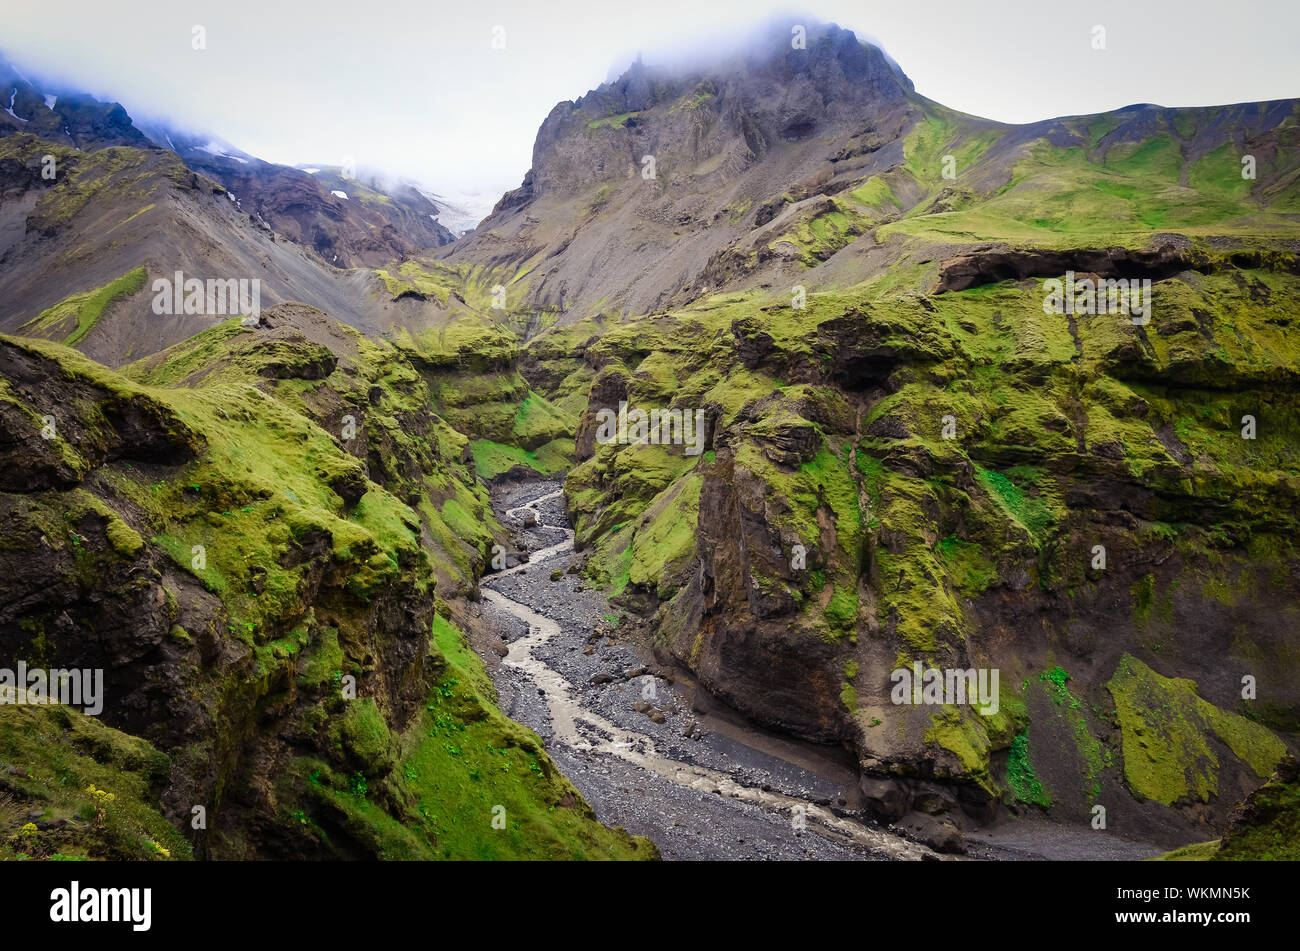 Landscape view of Thorsmork mountains canyon and river, near Skogar, Iceland Stock Photo